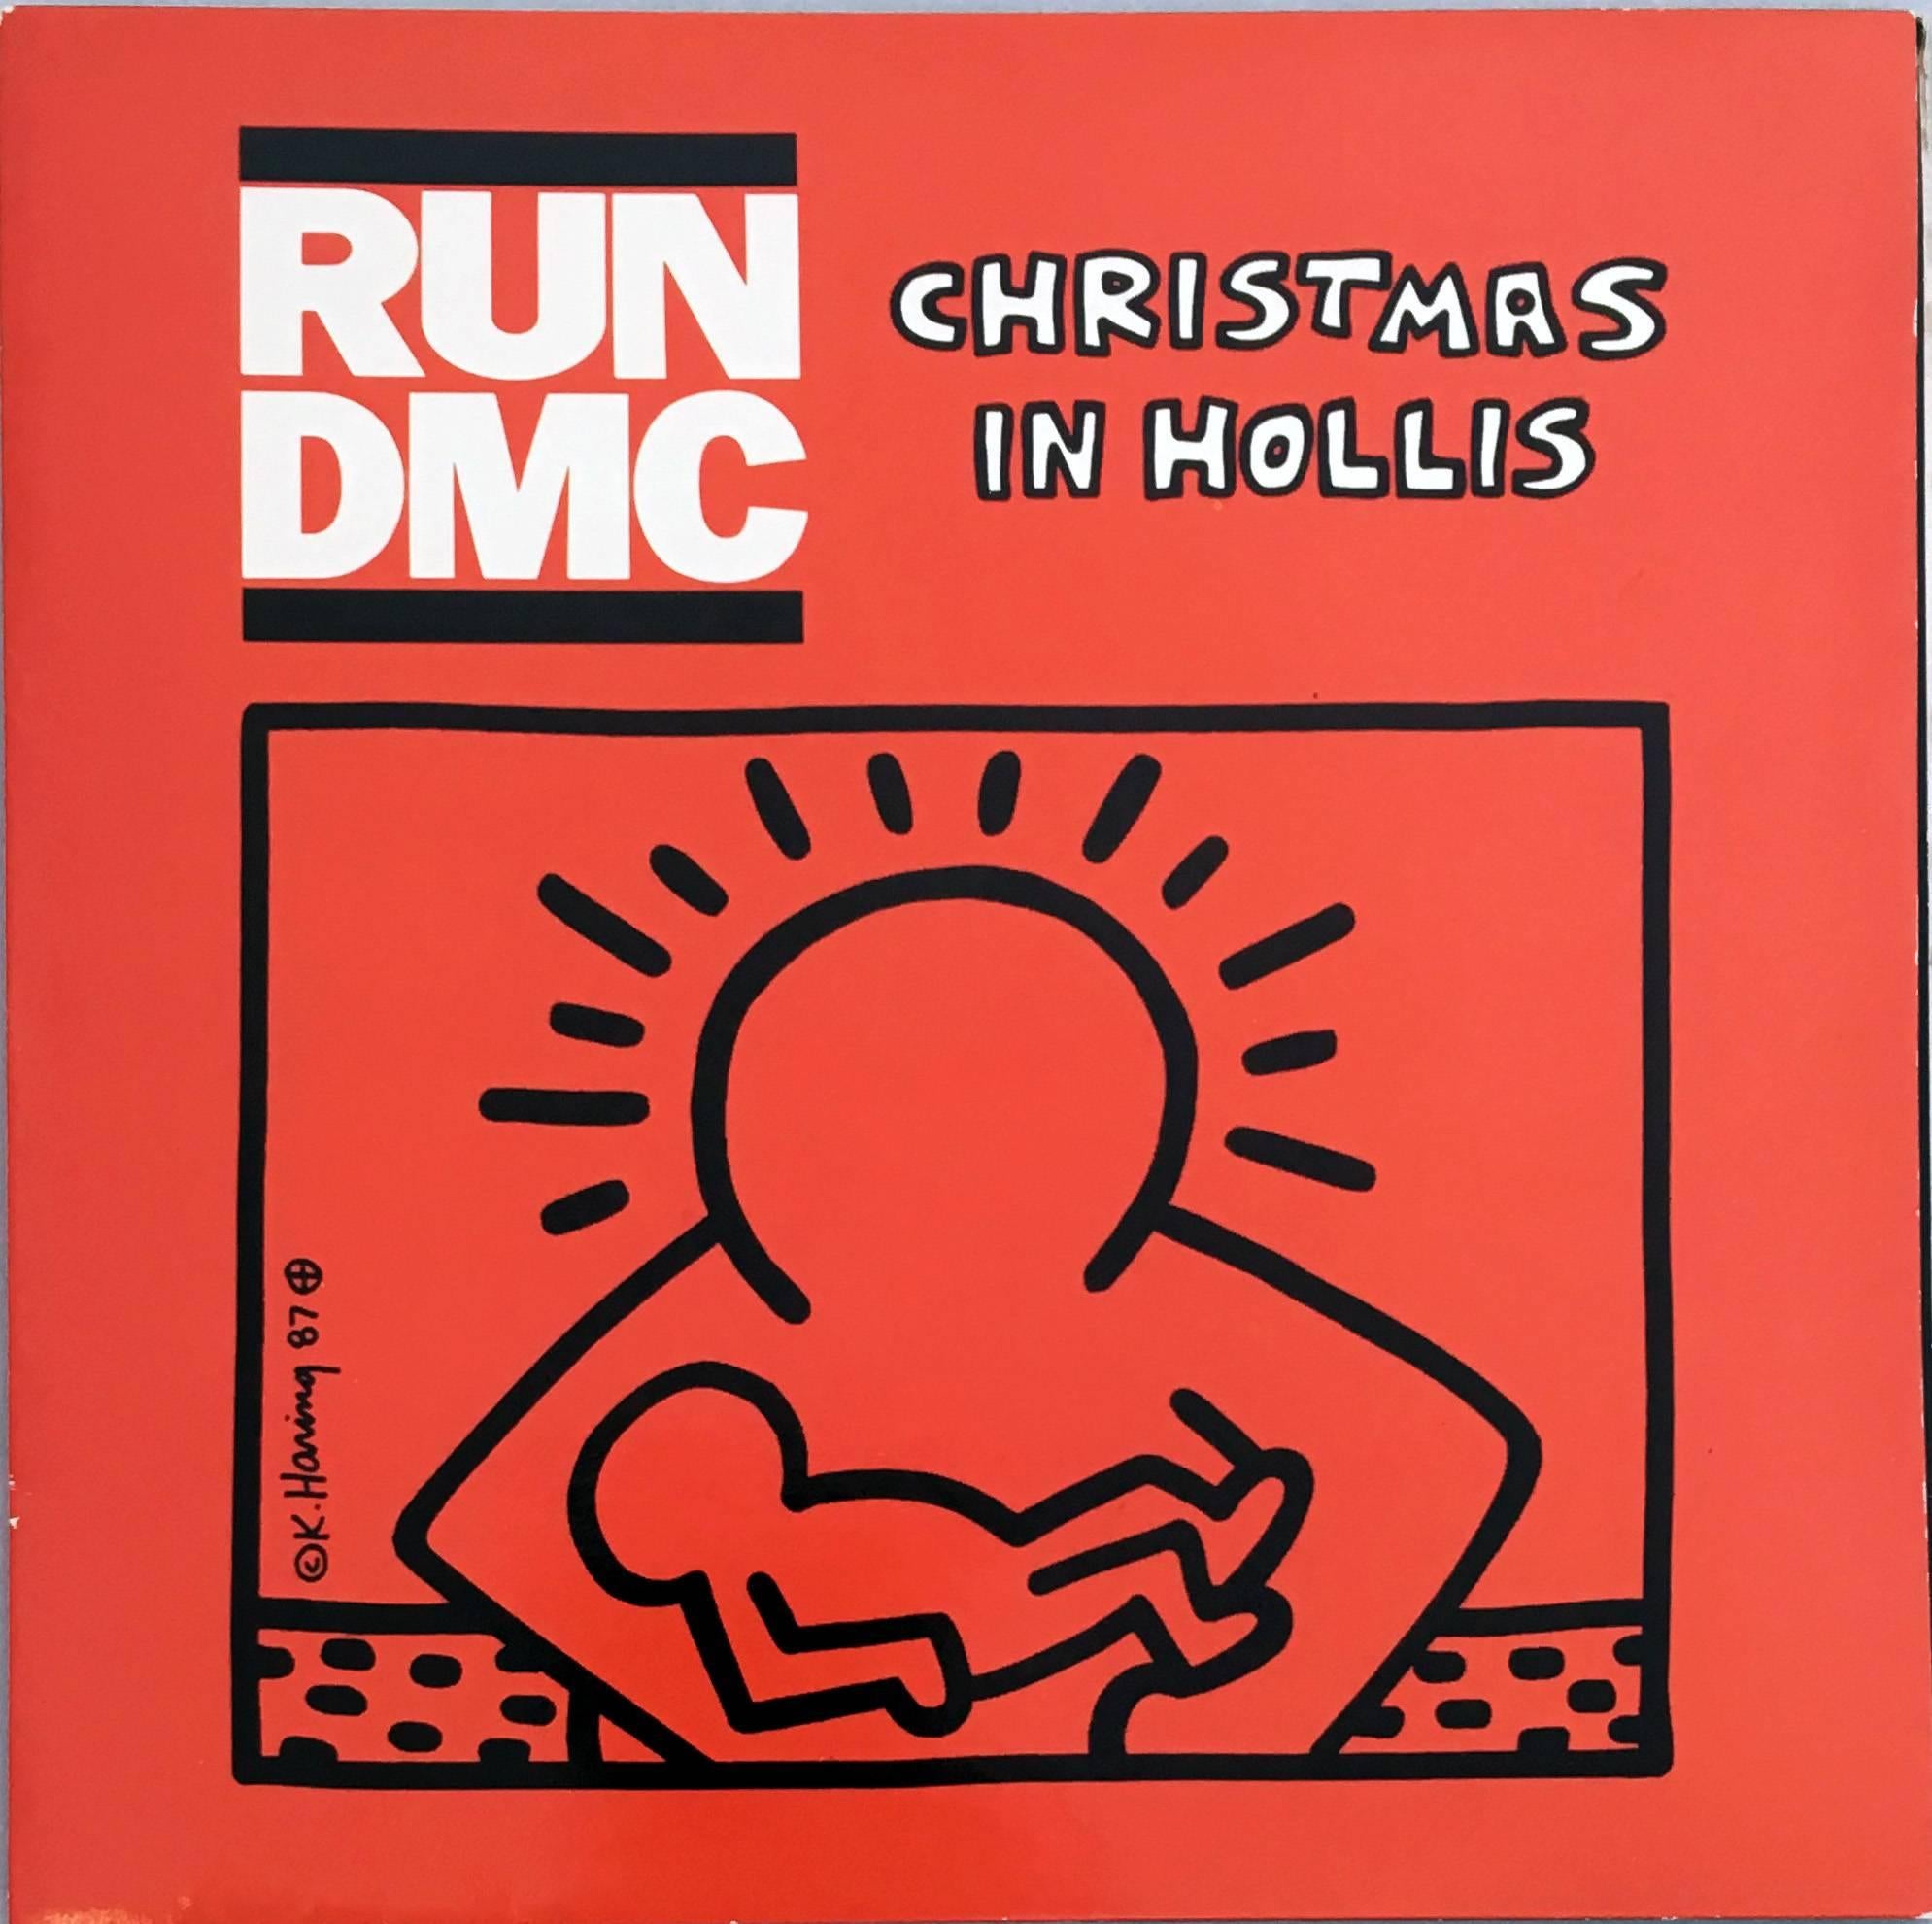 Run DMC "Christmas In Hollis" A Rare Highly Sought After Vinyl Art Cover featuring Original Artwork by Keith Haring. Truly vibrant colors that make for stand-out wall art and unique vintage Keith Haring collectible. 

*1st Pressing 1987 (not a